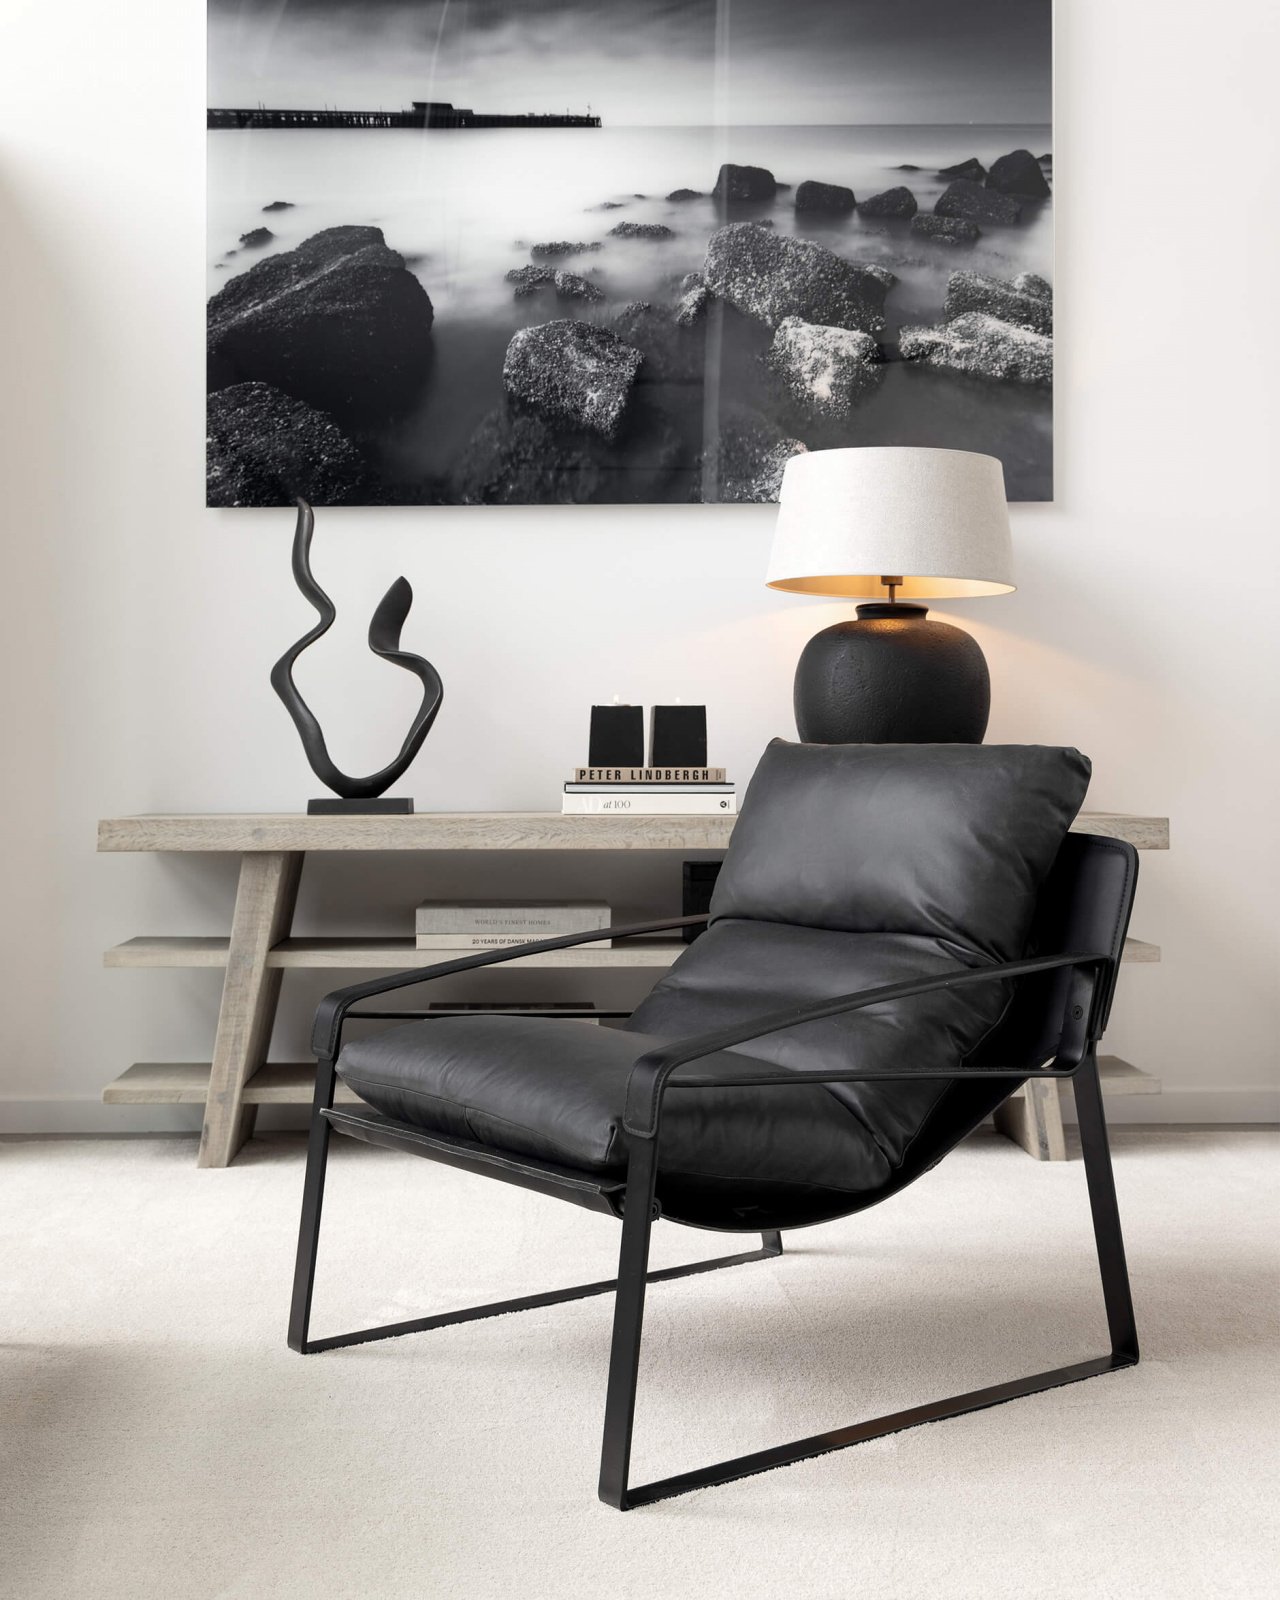 Hillsdale Lounge Chair Titanic Anthracite